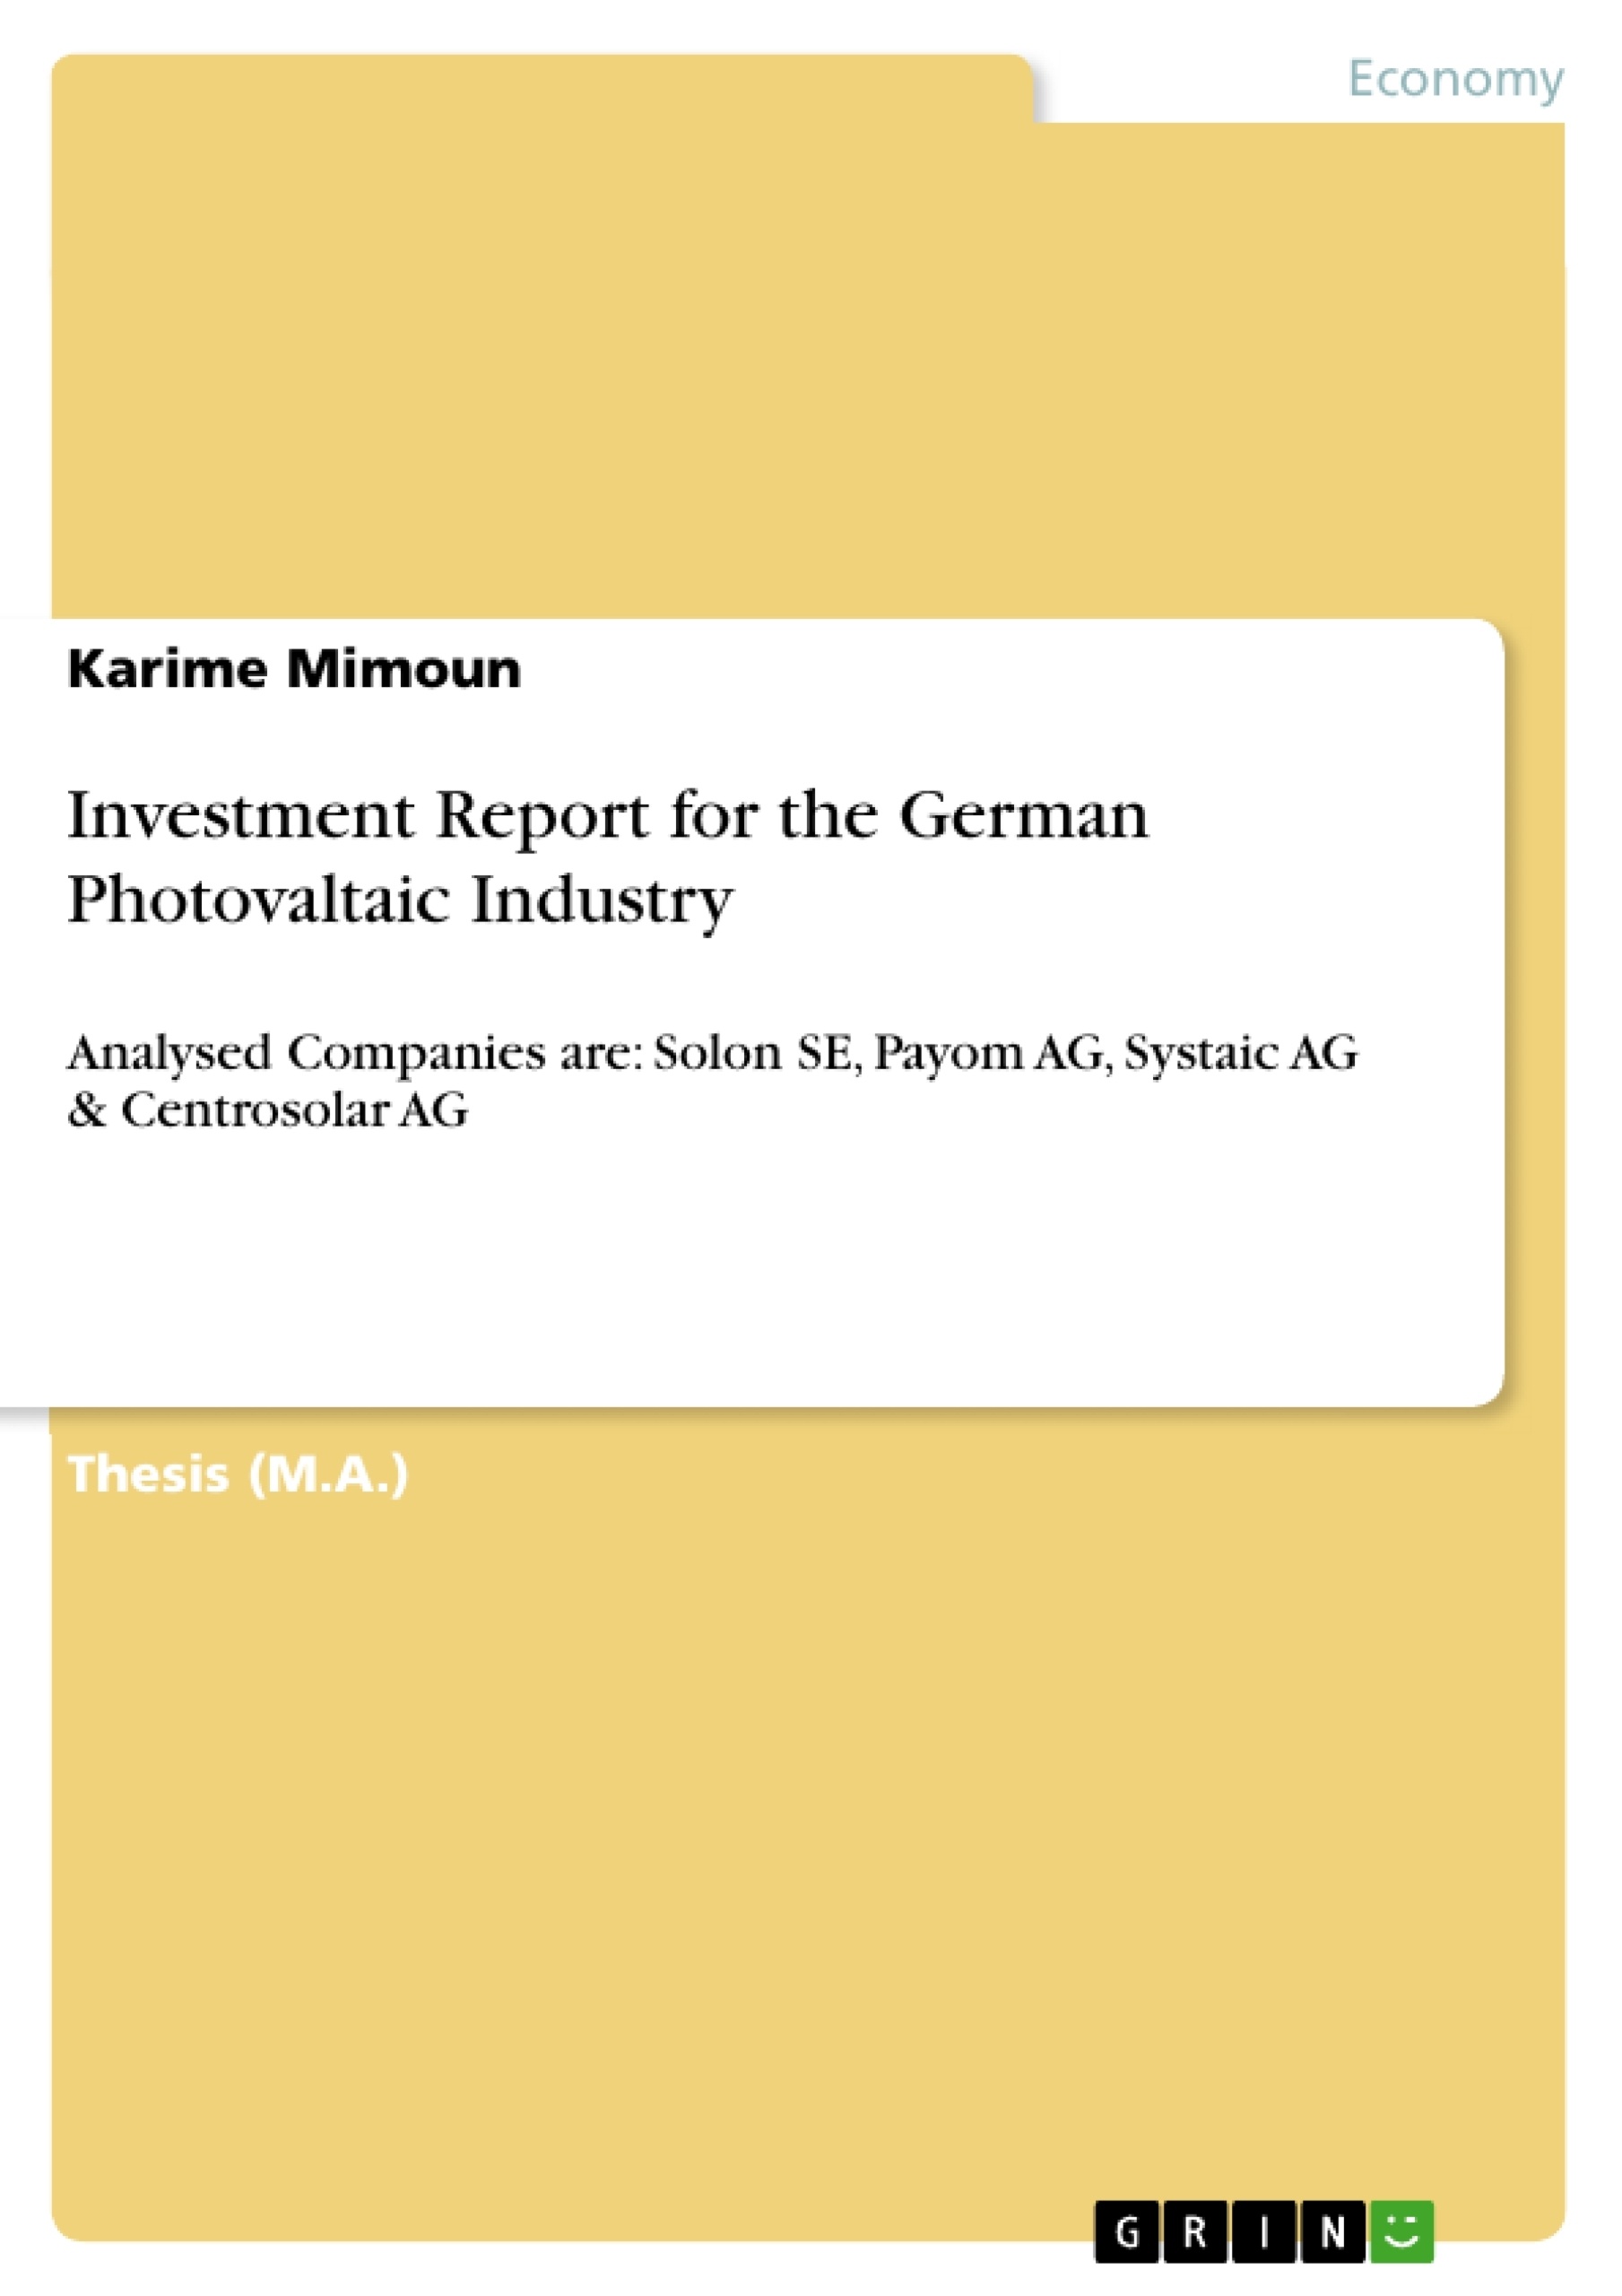 Title: Investment Report for the German Photovaltaic Industry